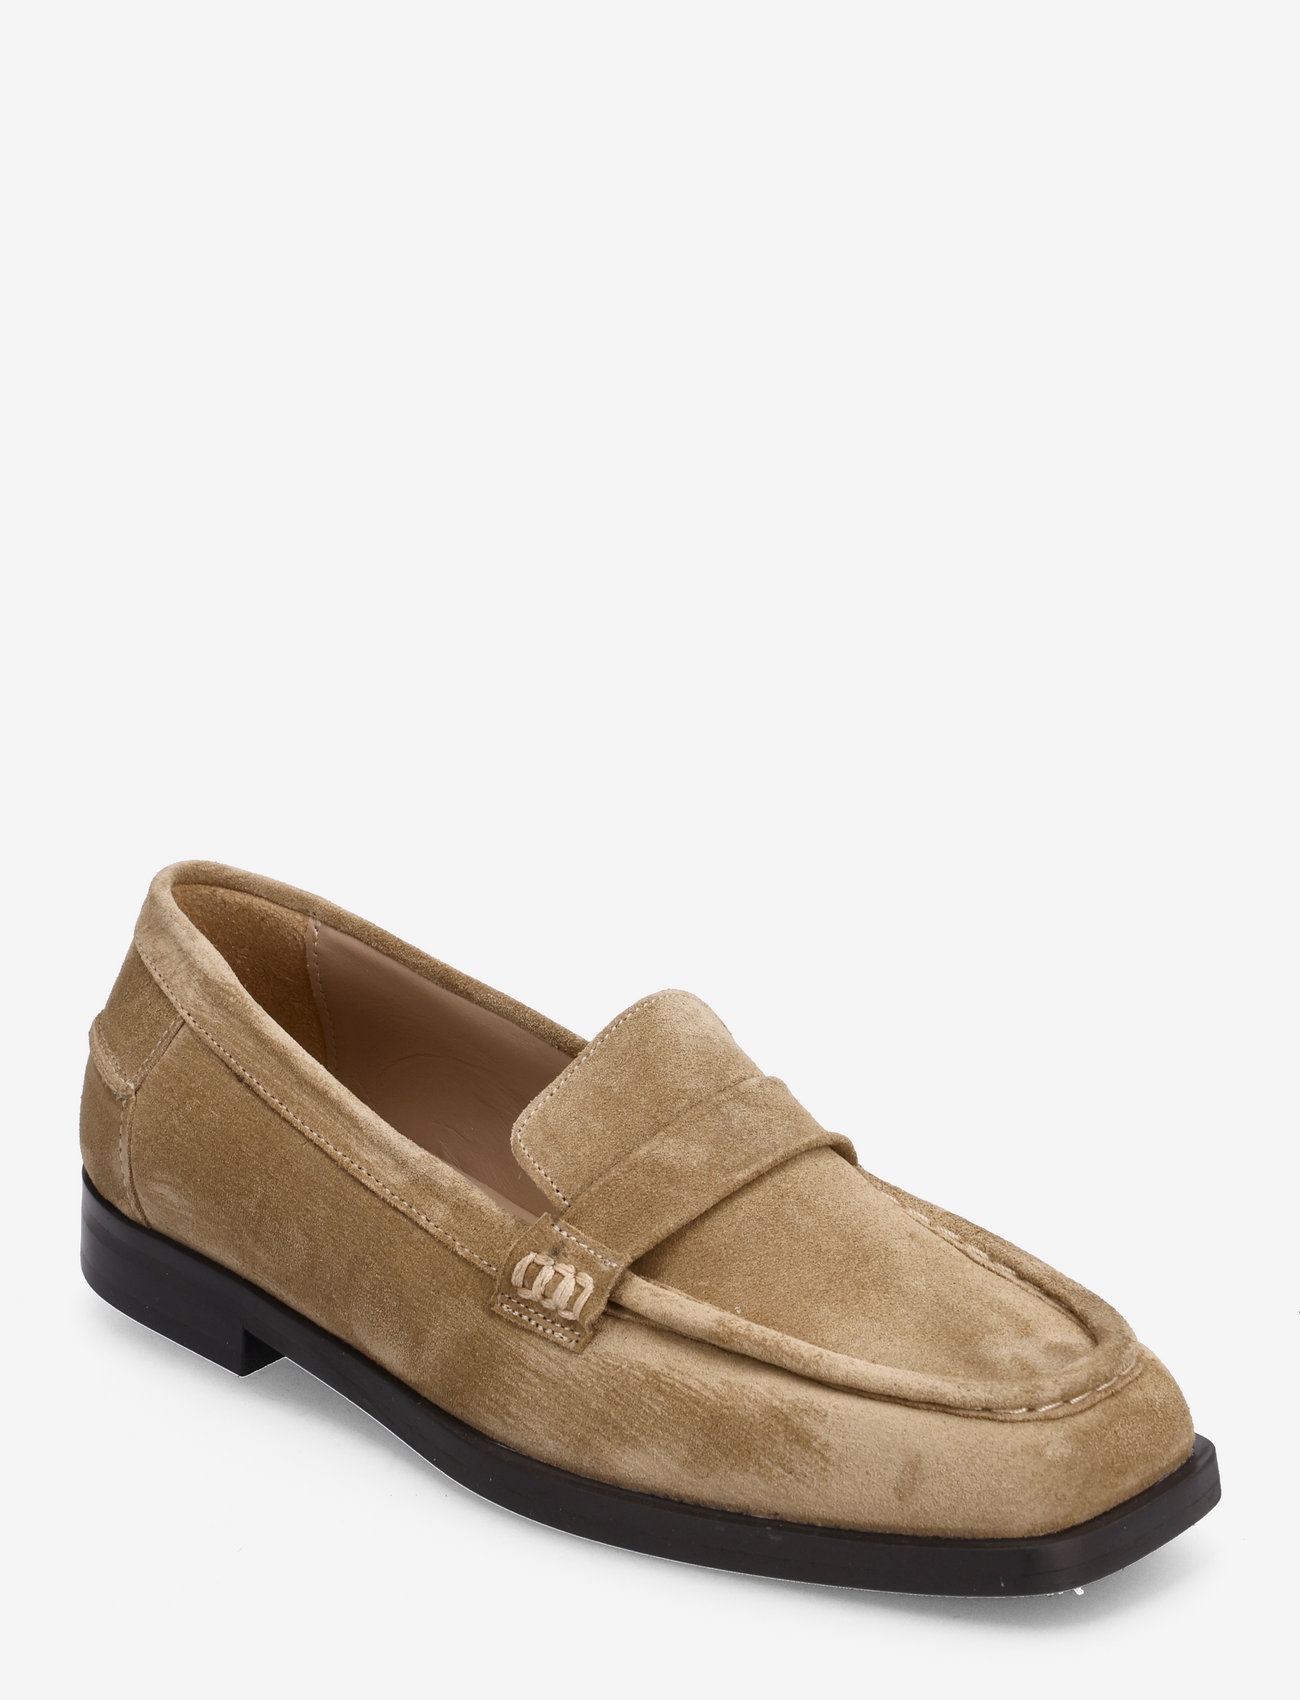 ANGULUS - Loafer - birthday gifts - 2217 sand - 0